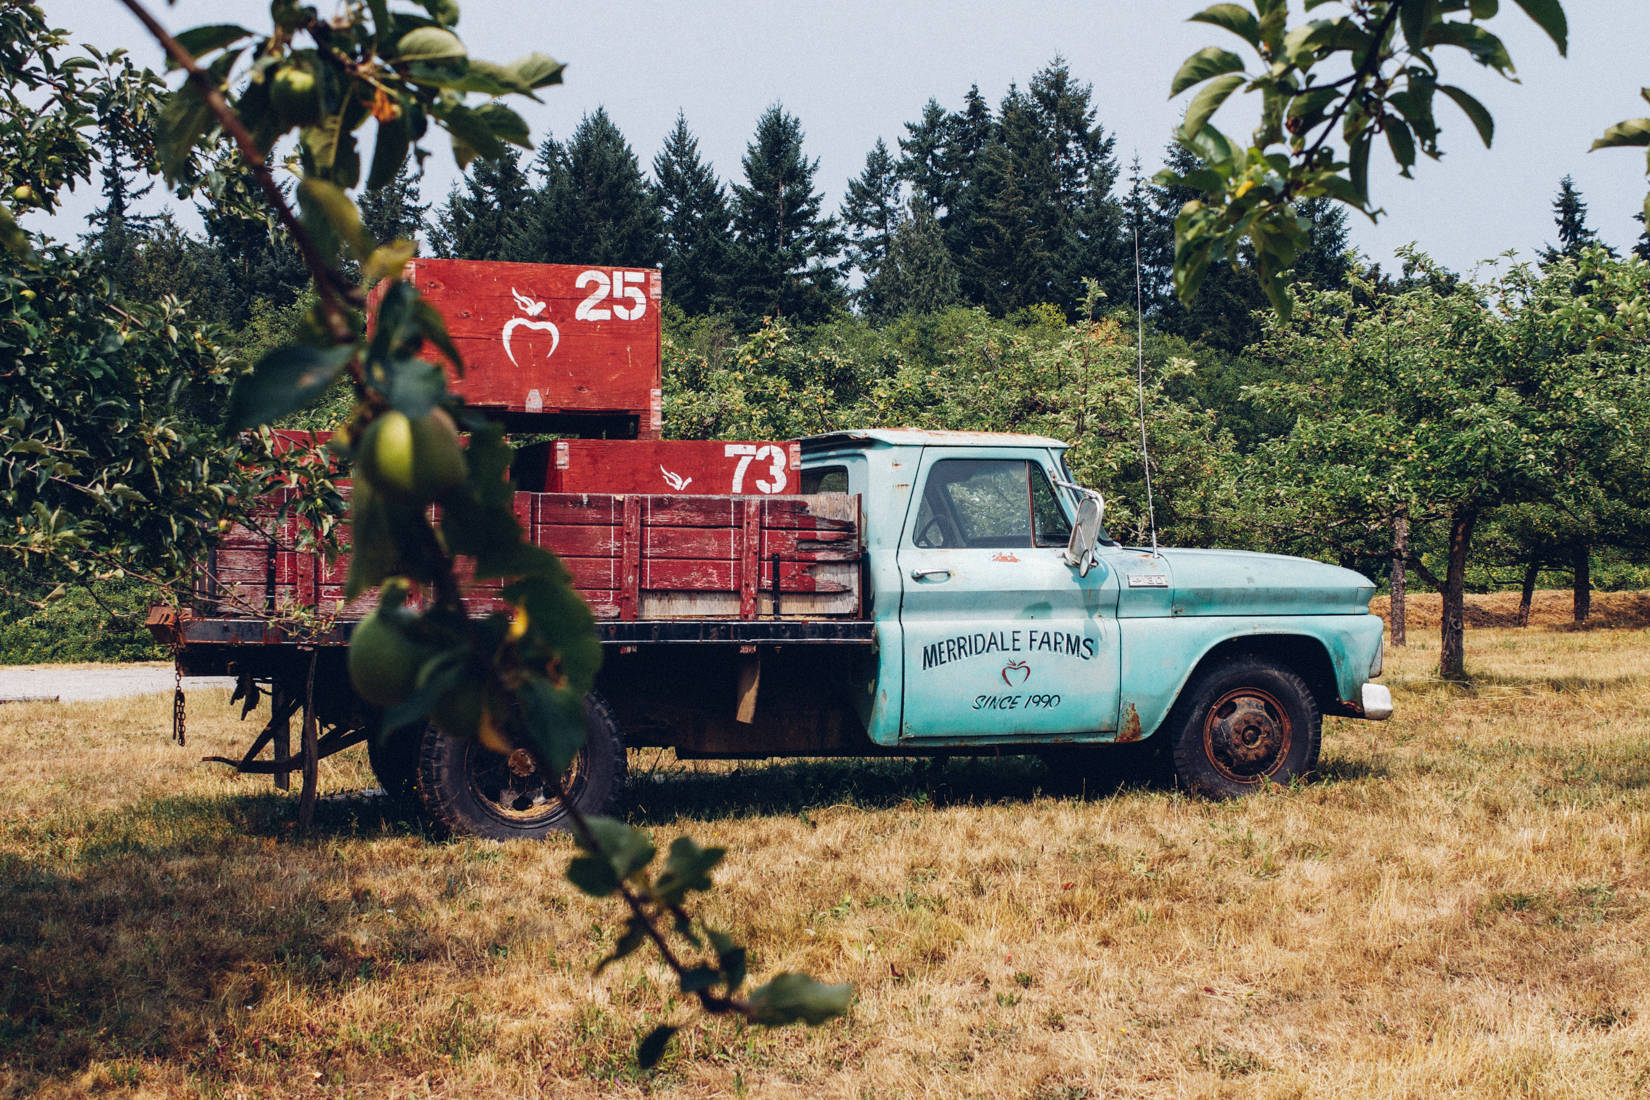 Merridale Cider is a larger cidery in the Greater Victoria Region, and pictured is a turquoise old pickup truck carrying crates for apples within the orchards.